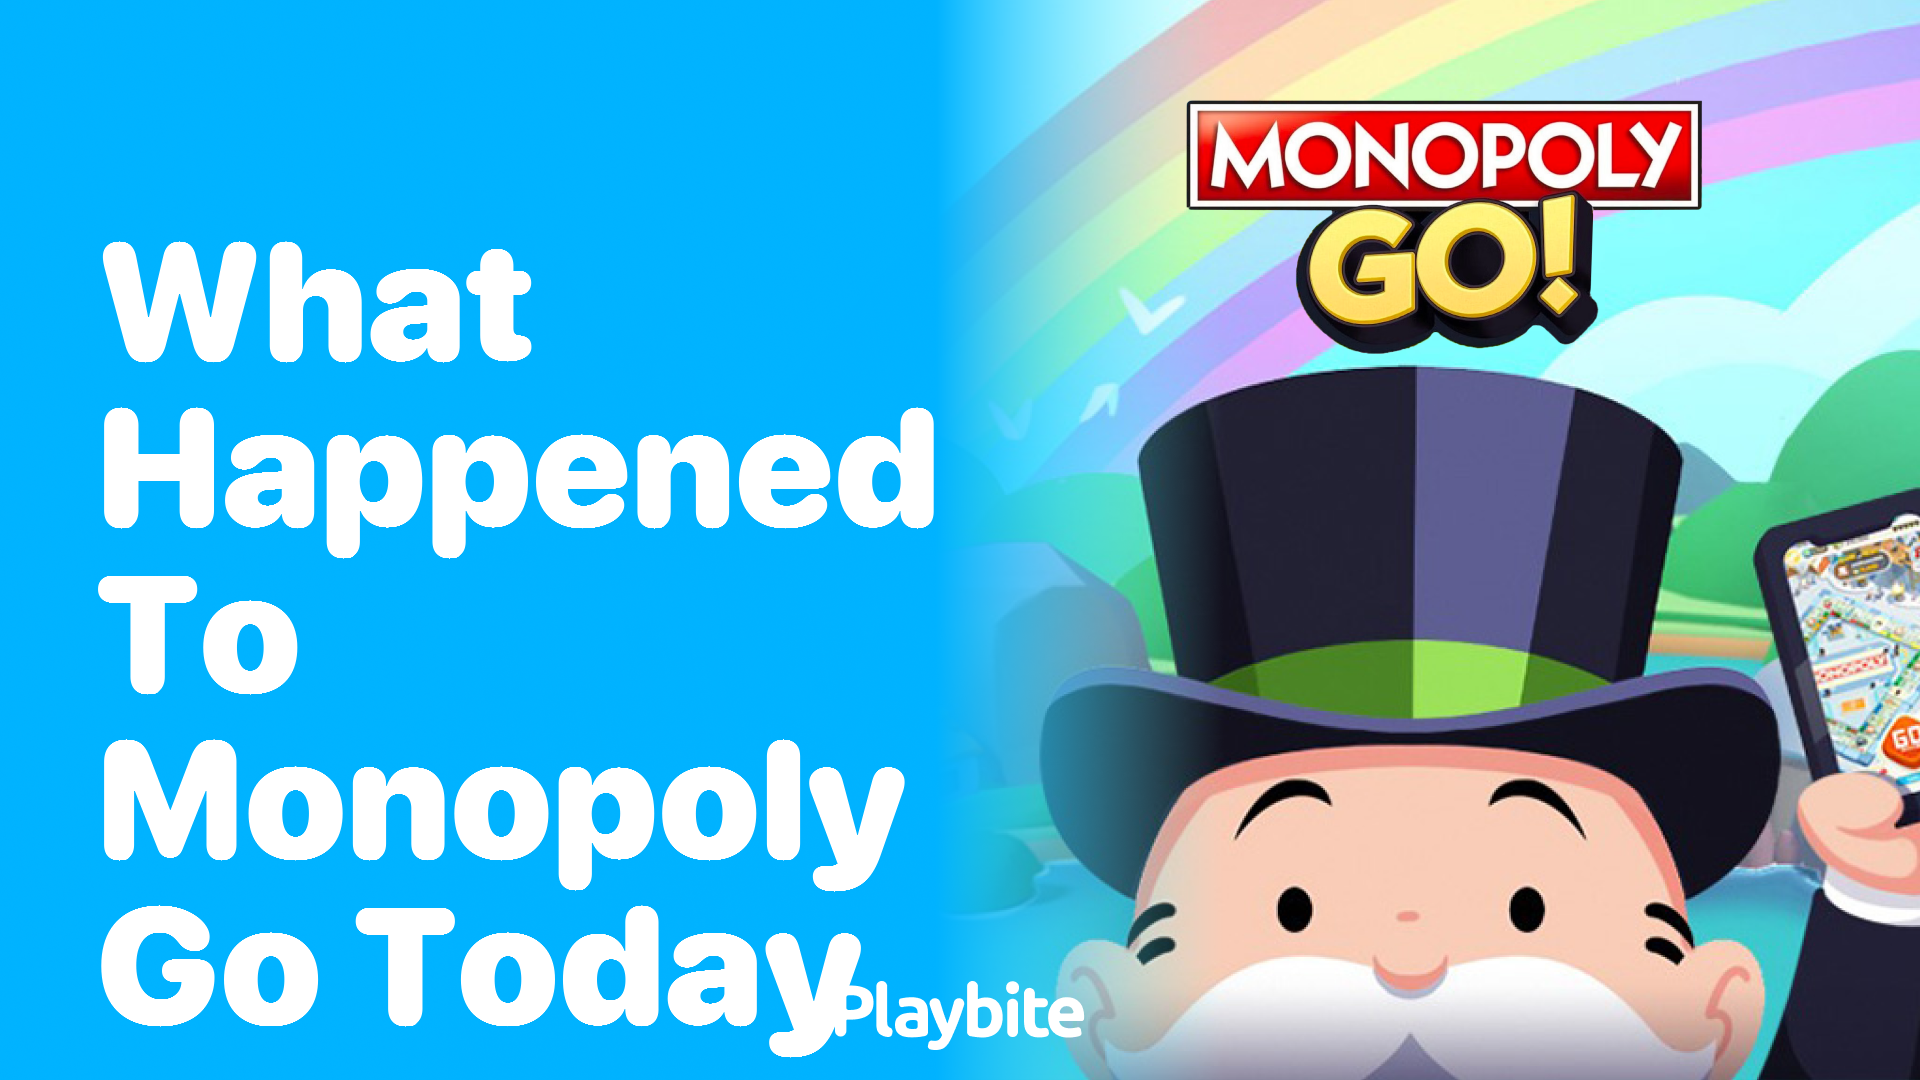 What Happened to Monopoly Go Today?